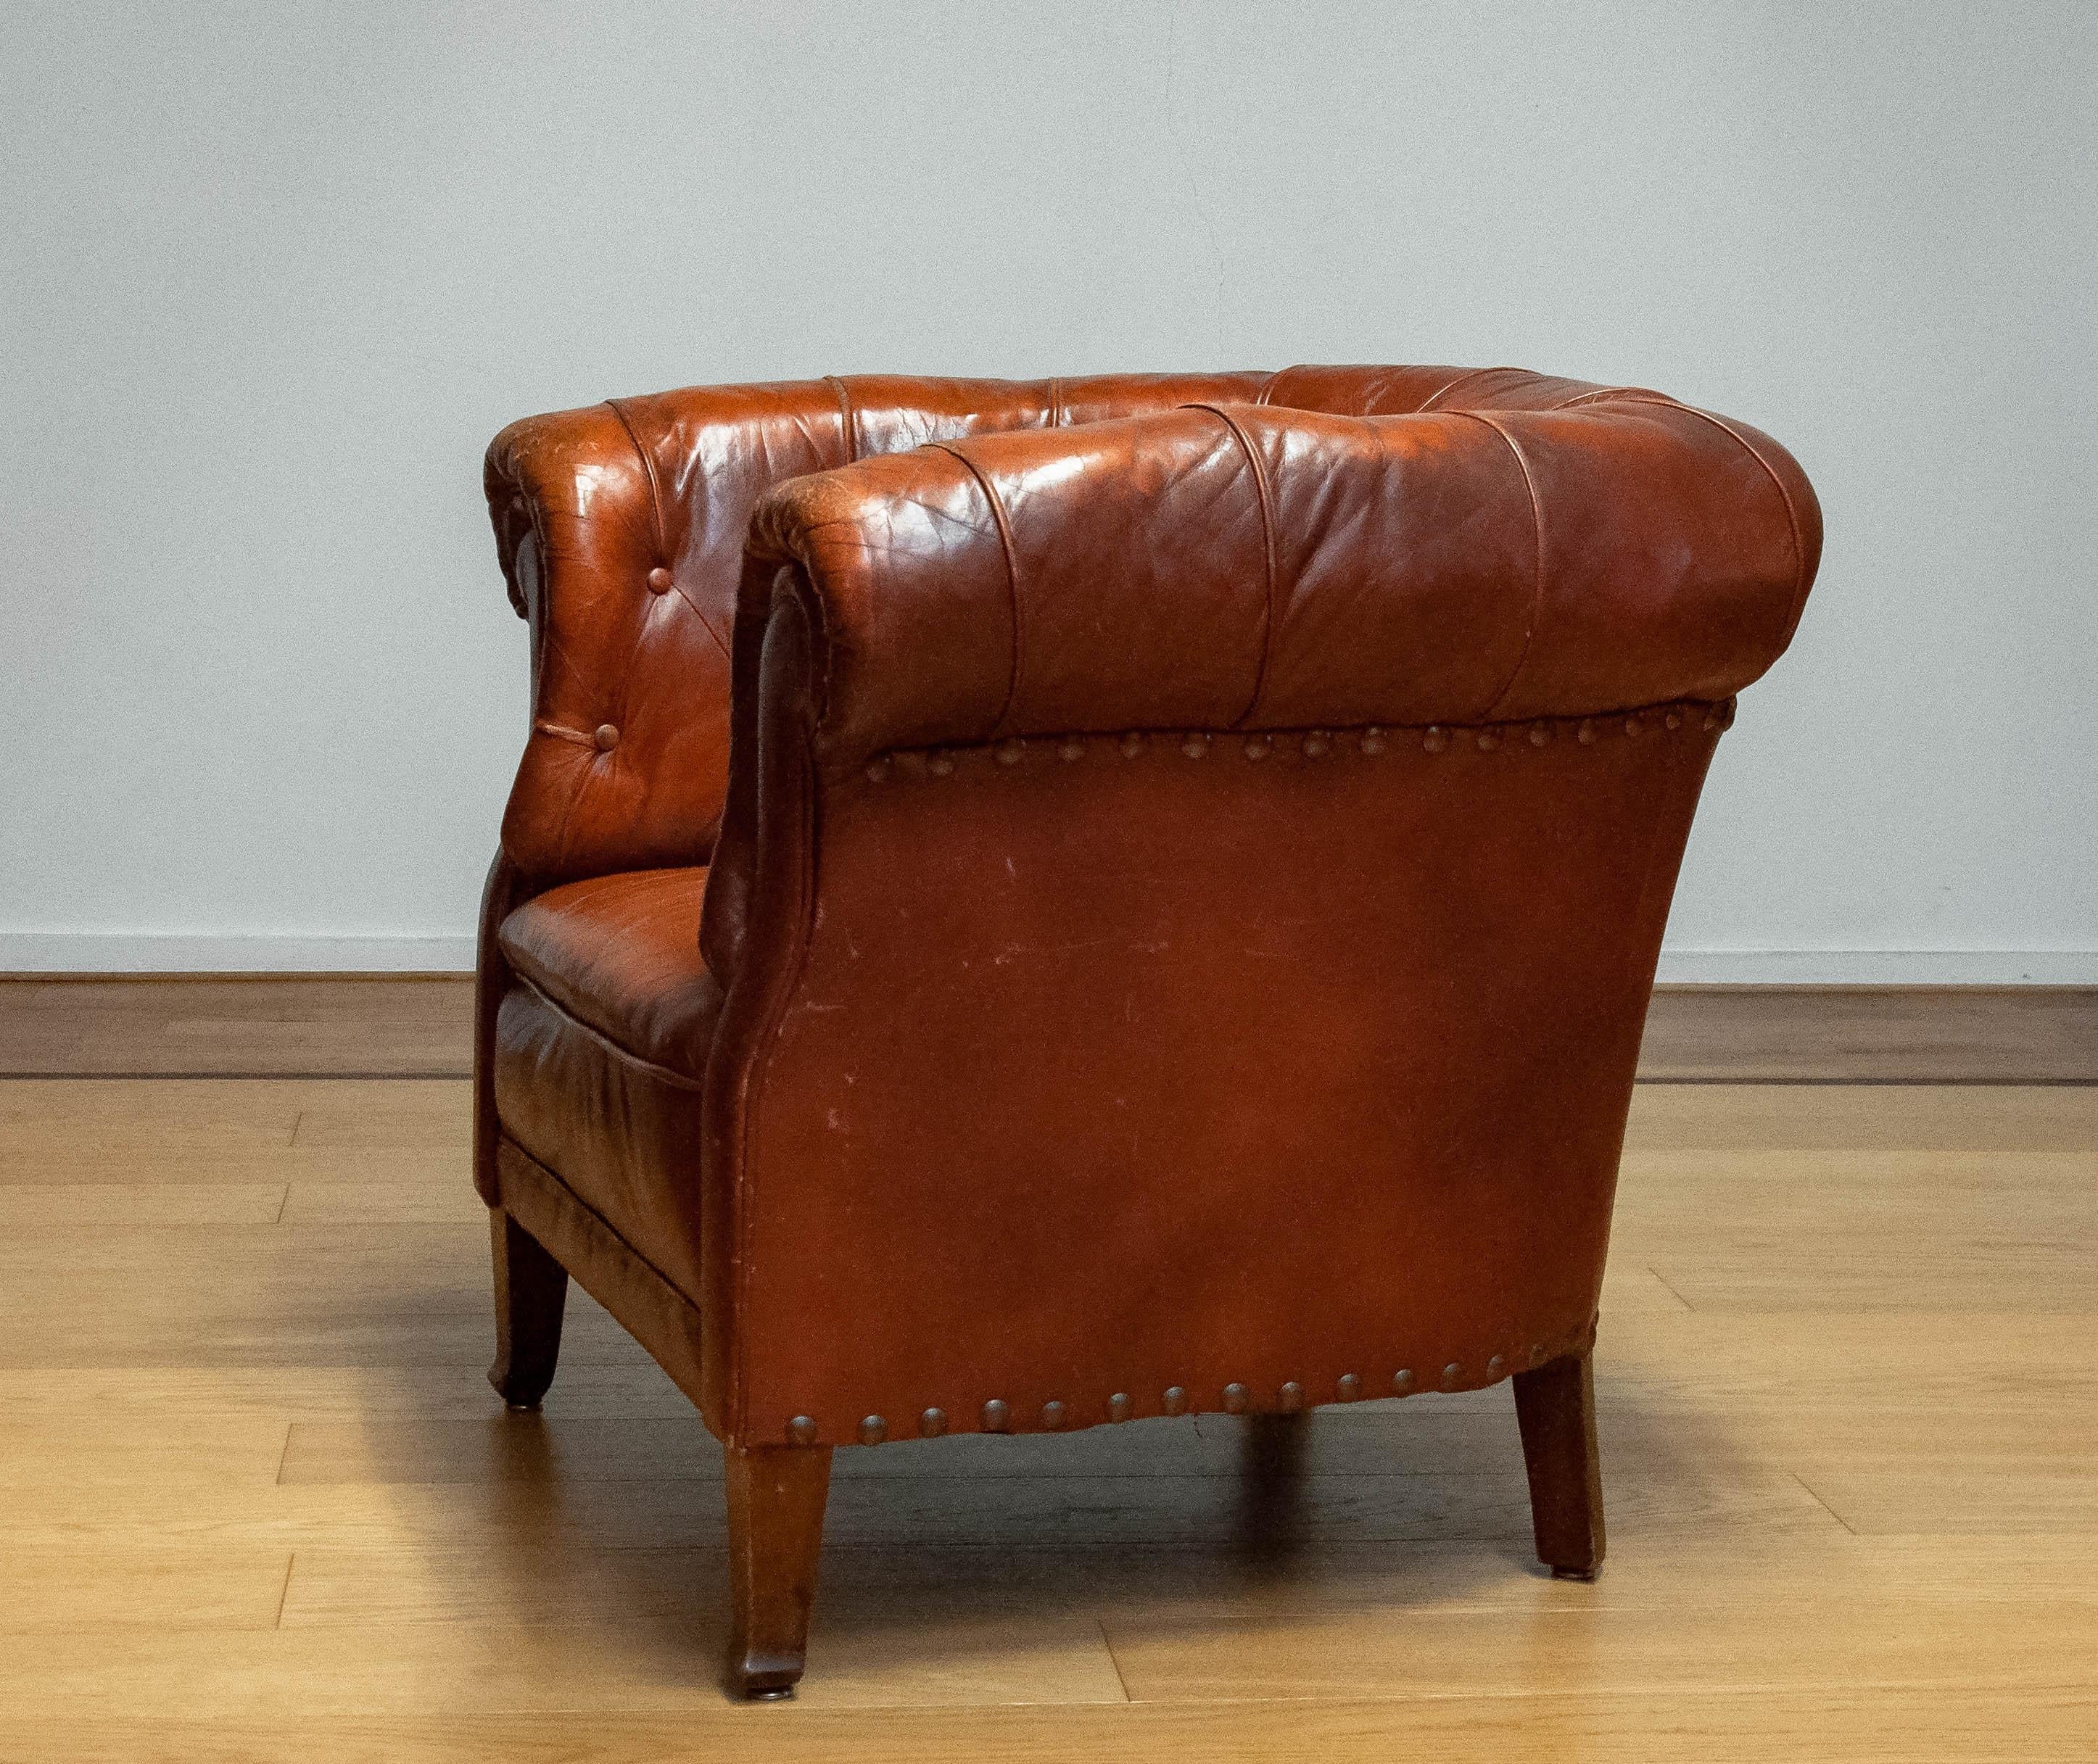 1940s Swedish Tufted Club Chair 'Chesterfield Model' In Tan Brown Worn Leather 6